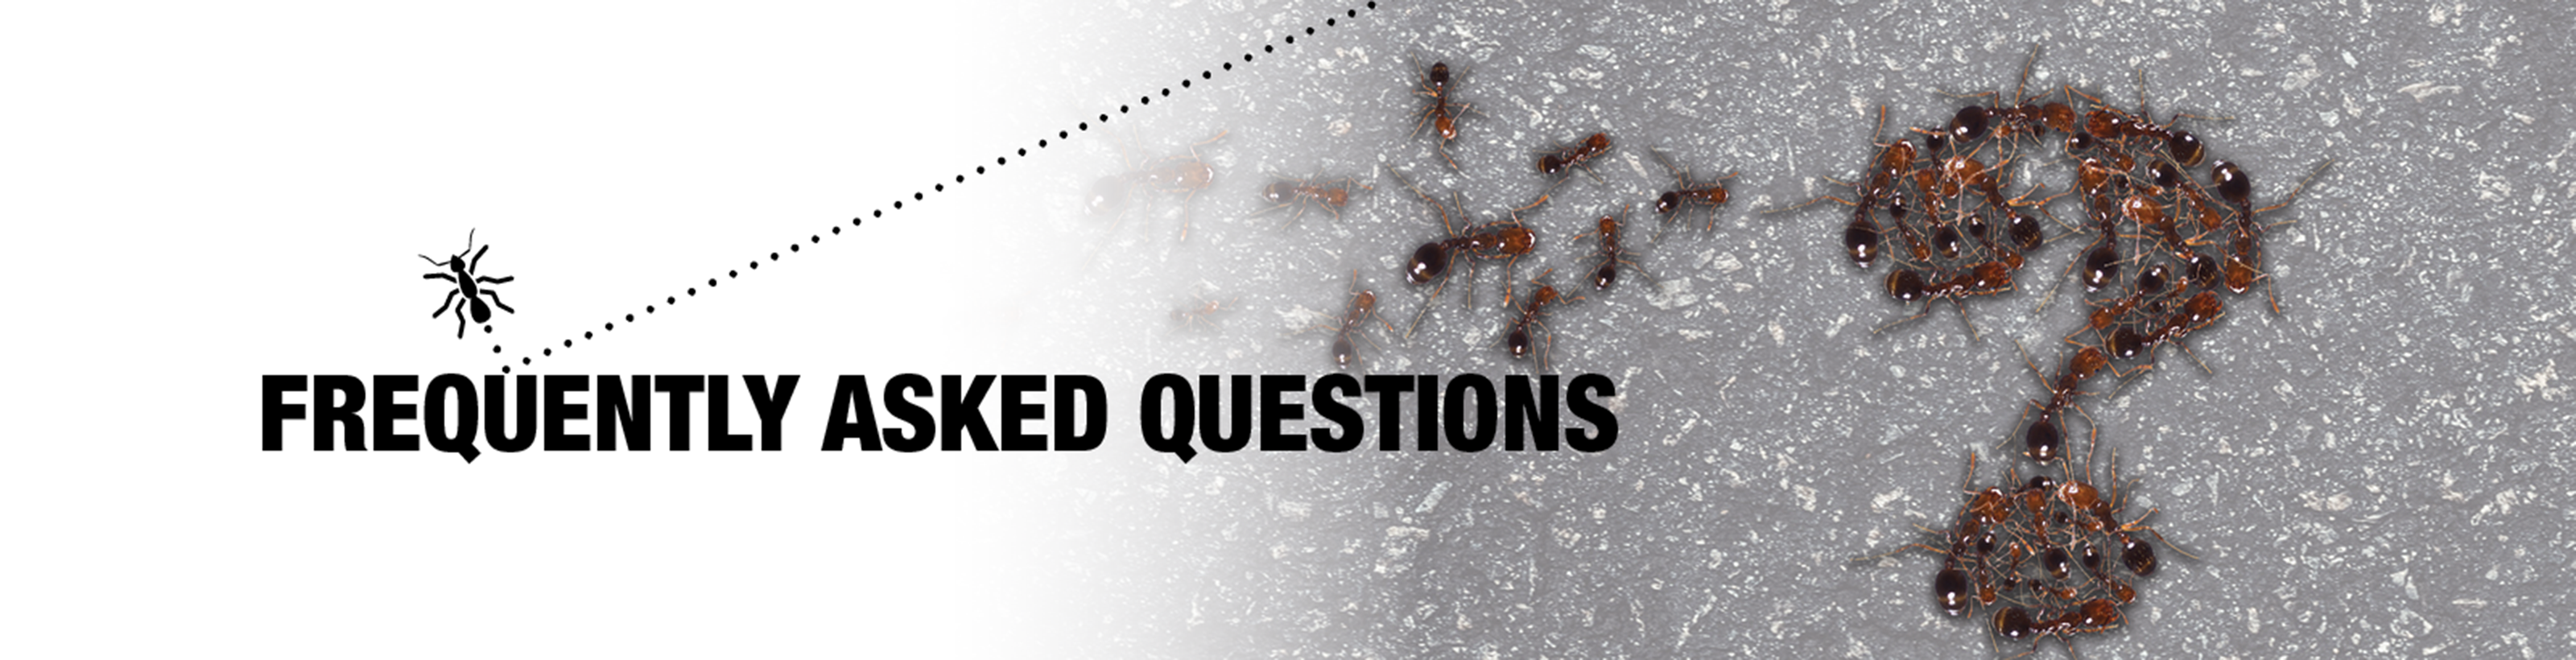 Frequently Asked Questions header with images of ants making a question mark